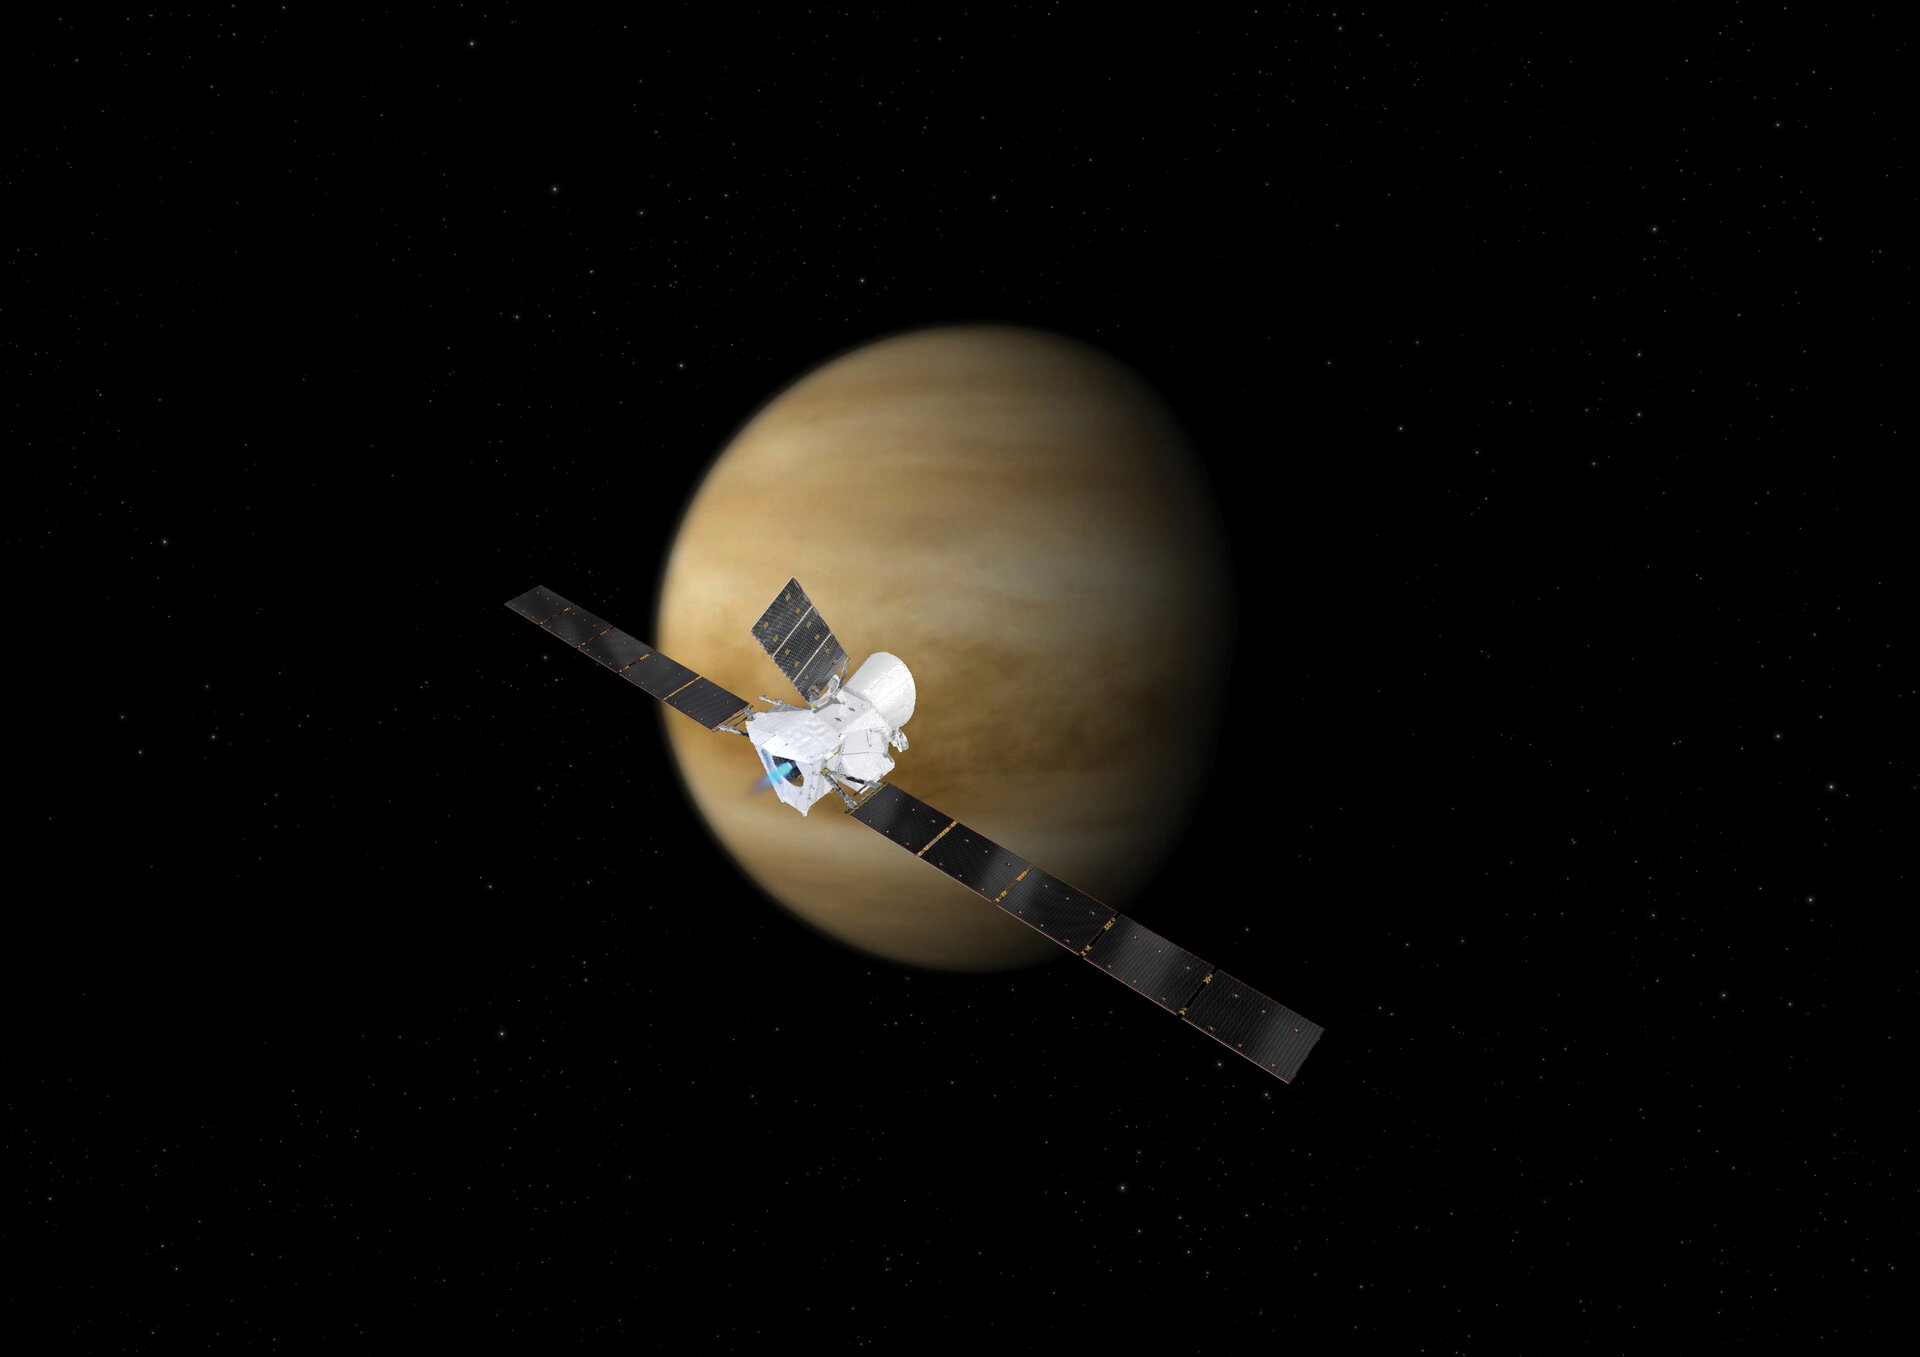 Venus is leaking carbon and oxygen, a fleeting visit by BepiColombo reveals